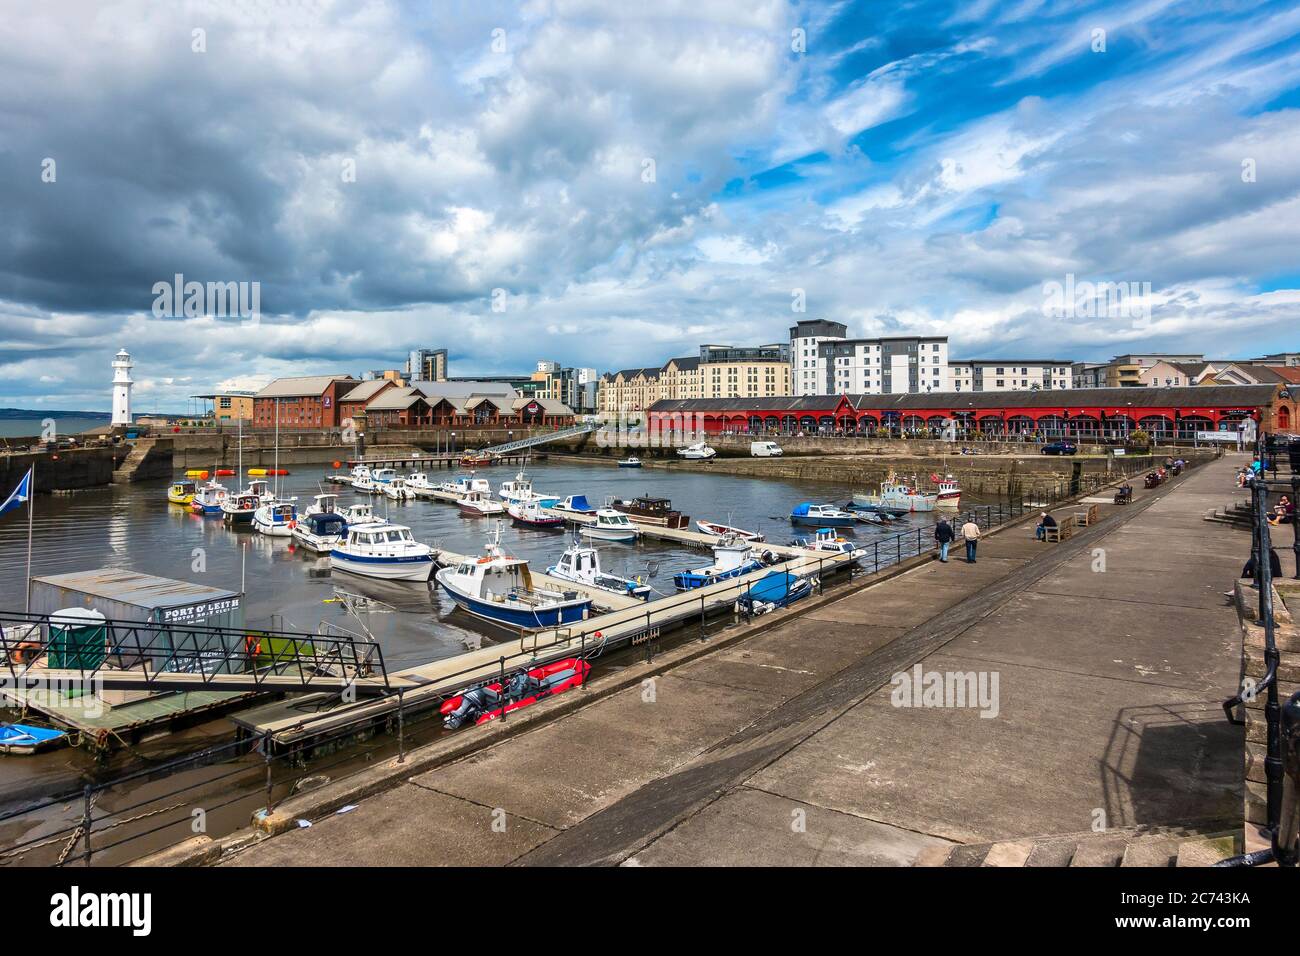 Newhaven Habour at the west end of Western Harbour Leith Docks Edinburgh Scotland with lighthouse at the harbour entrance and boats moored at low tide Stock Photo